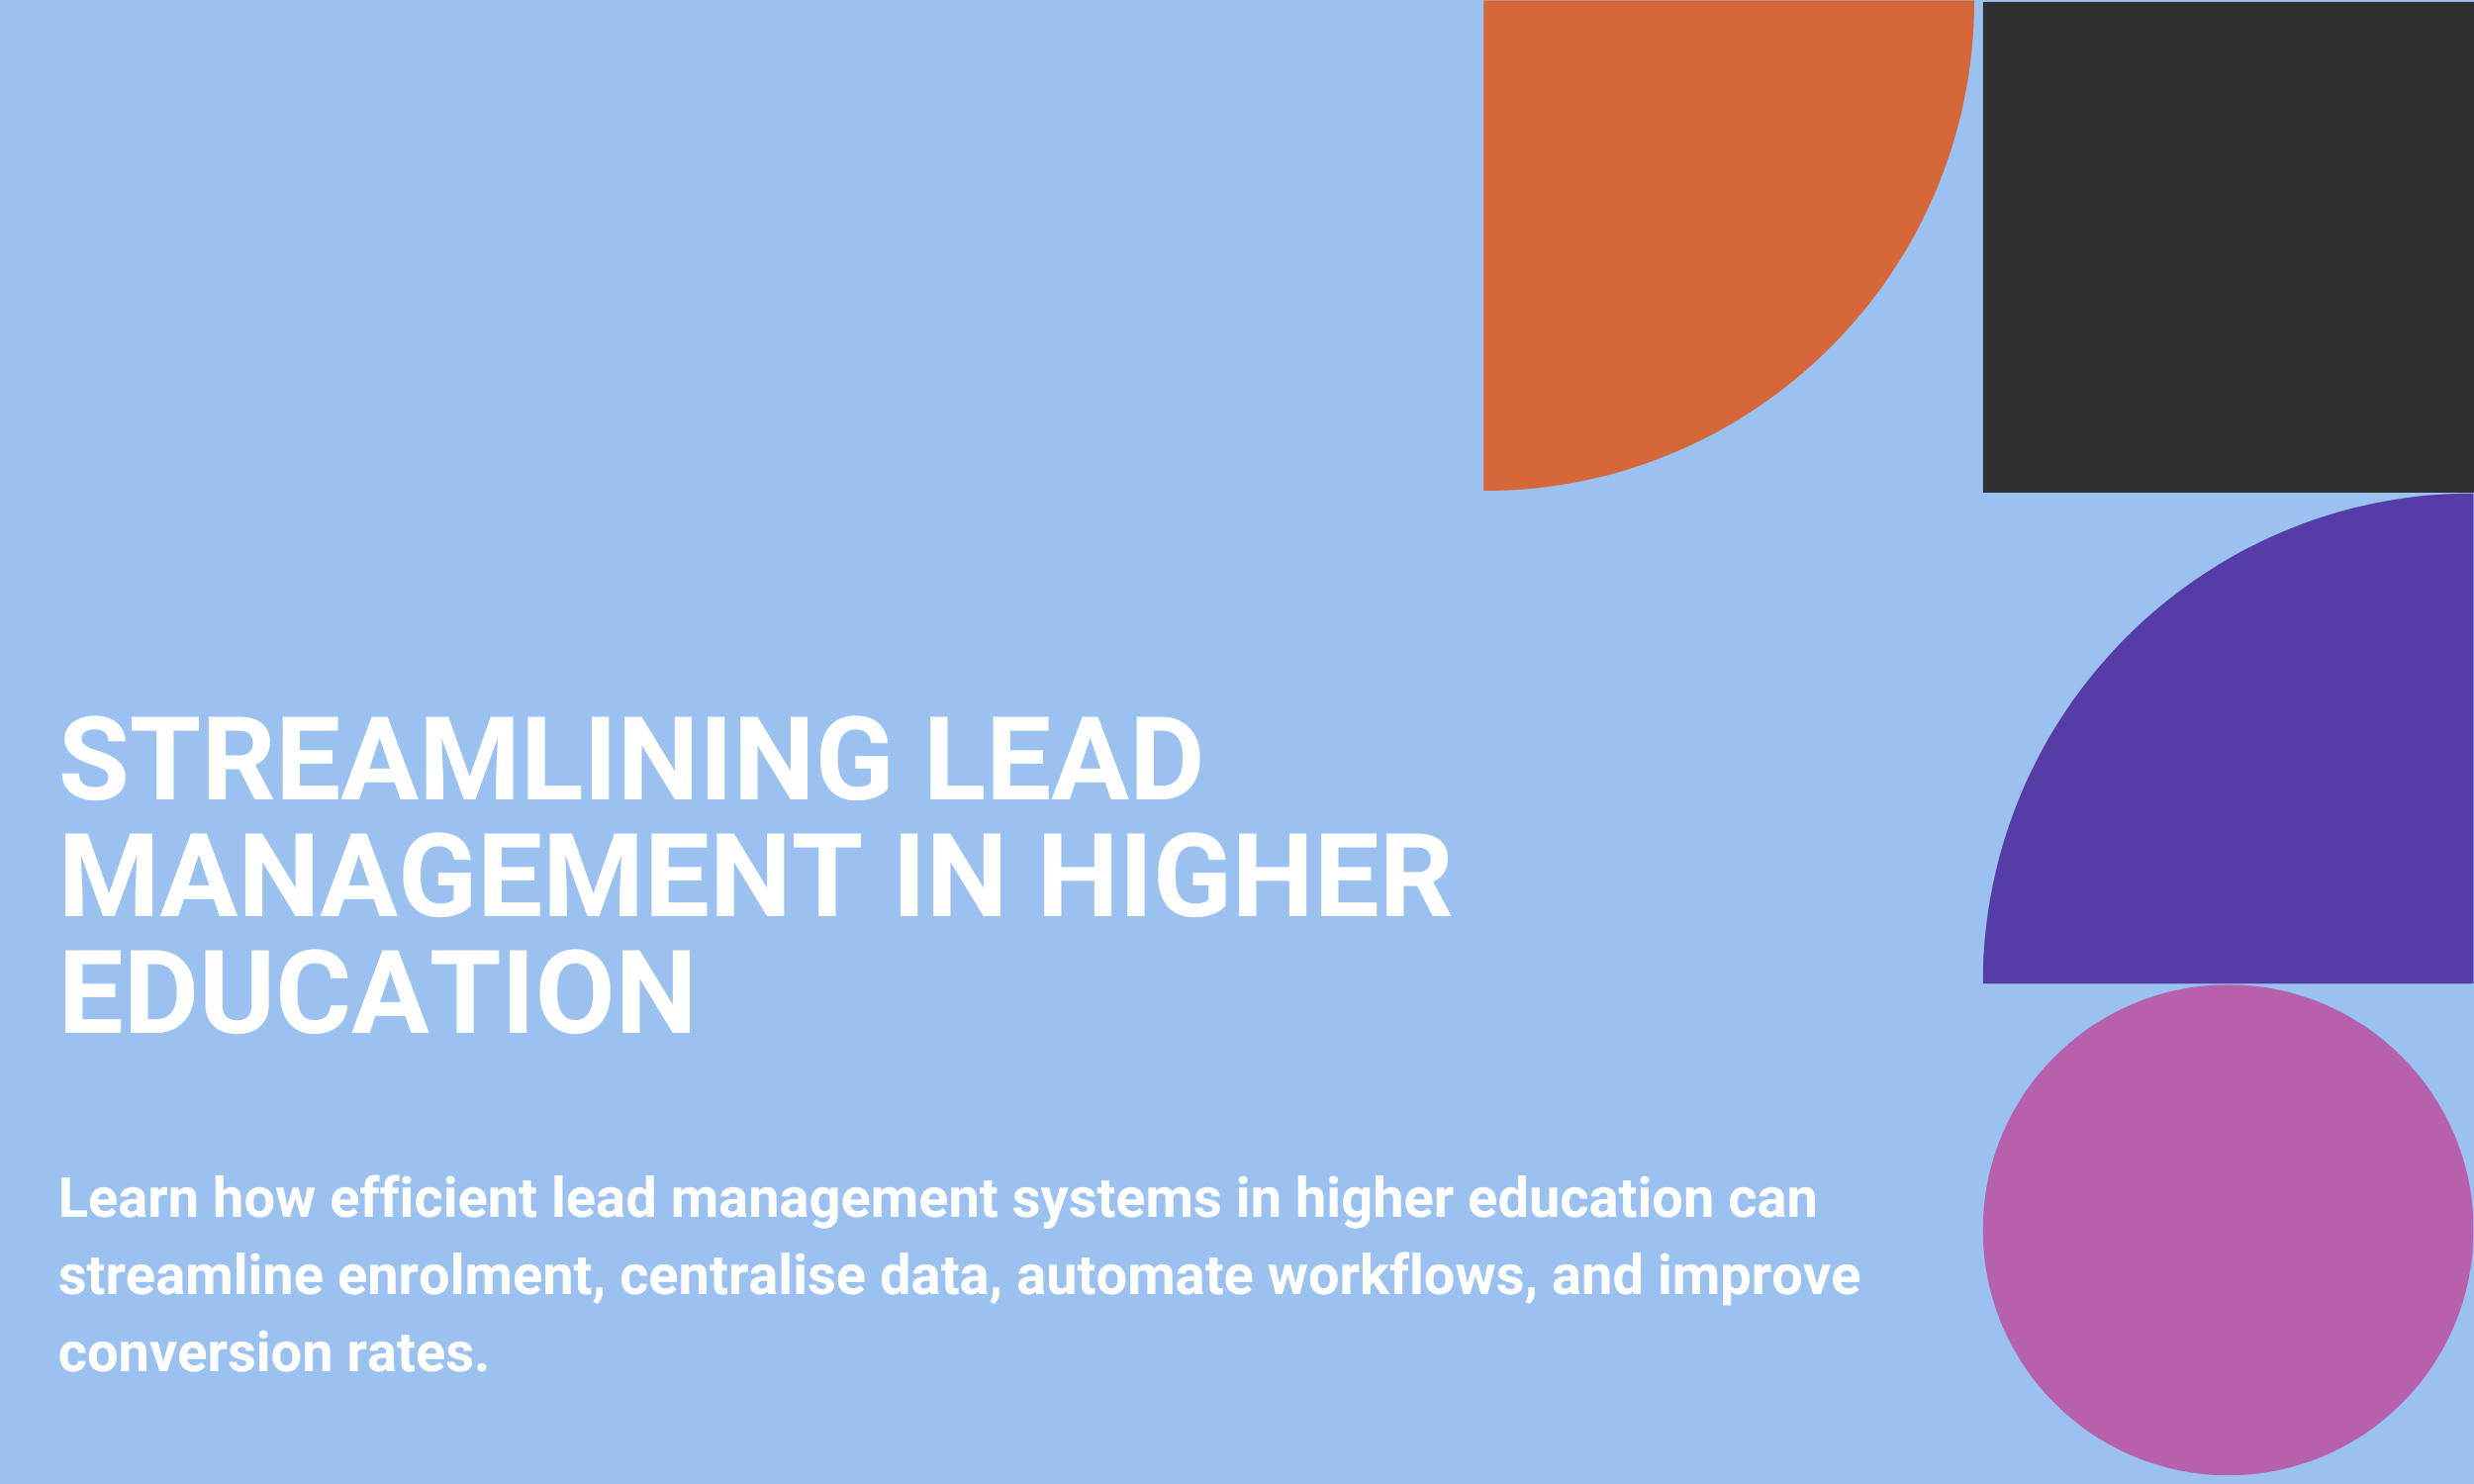 Streamlining Lead Management in Higher Education